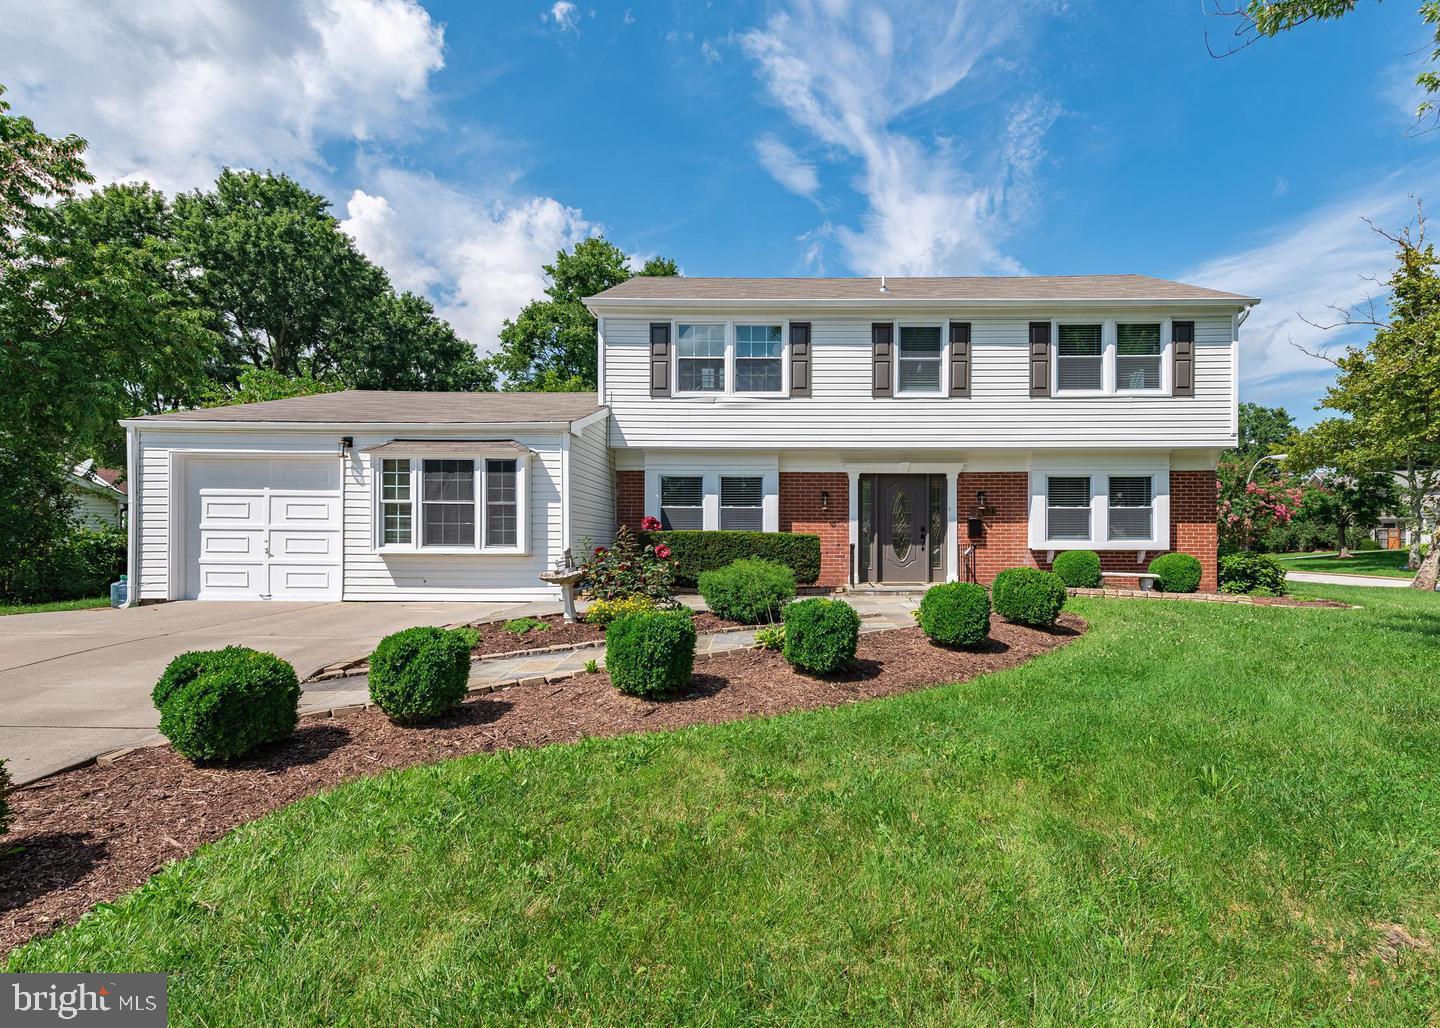 Bowie,MD- $610,000